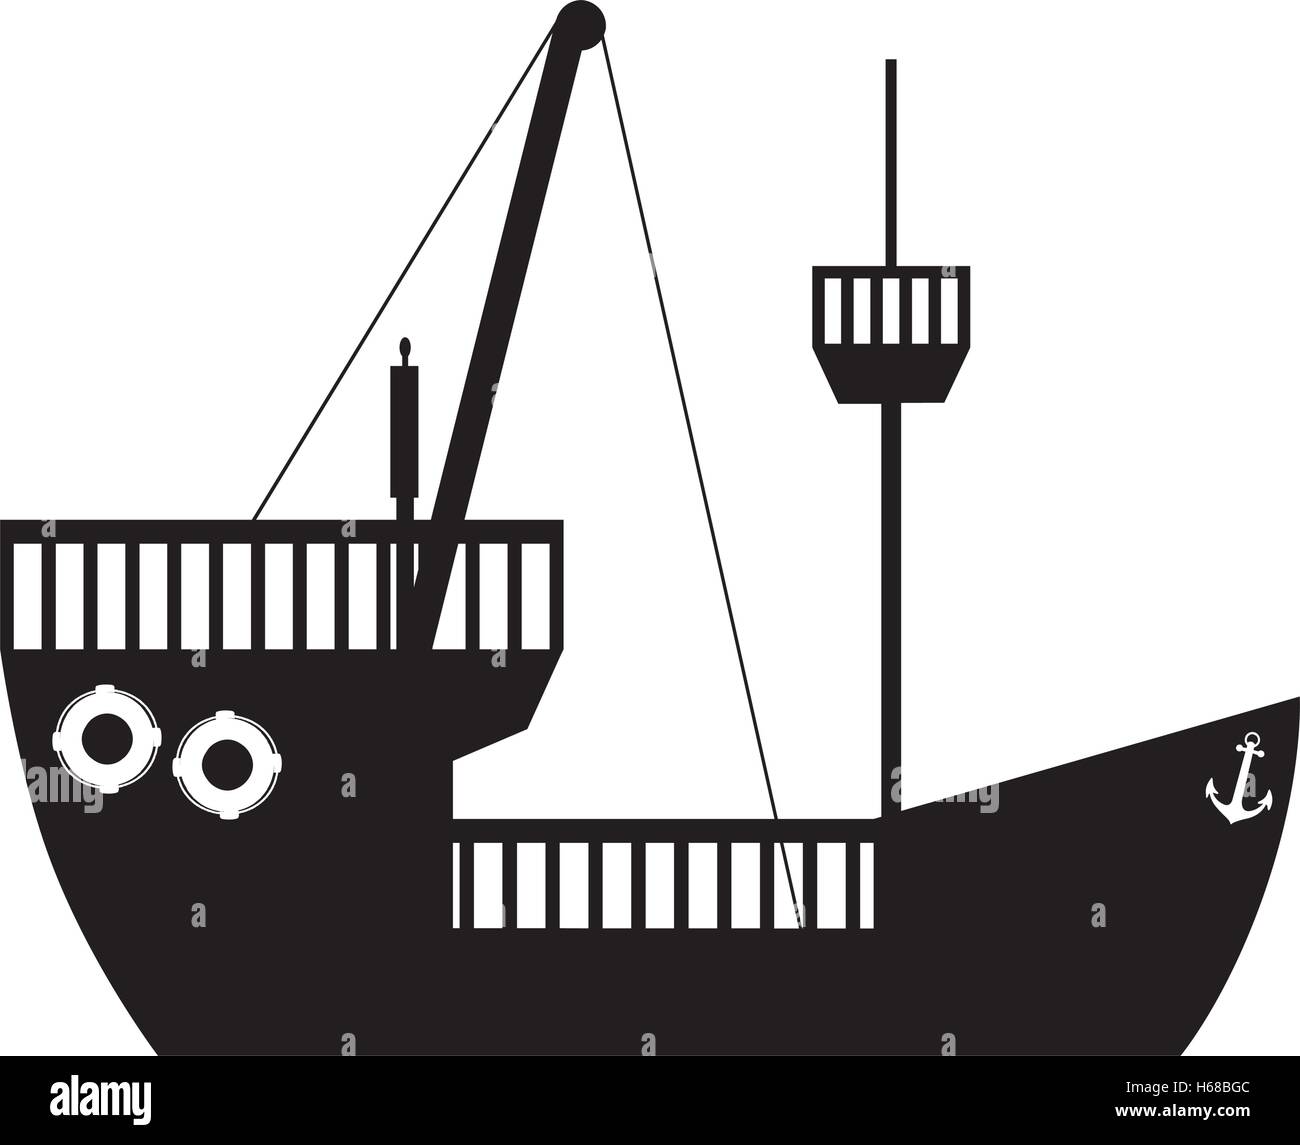 boat or ship pictogram icon image Stock Vector